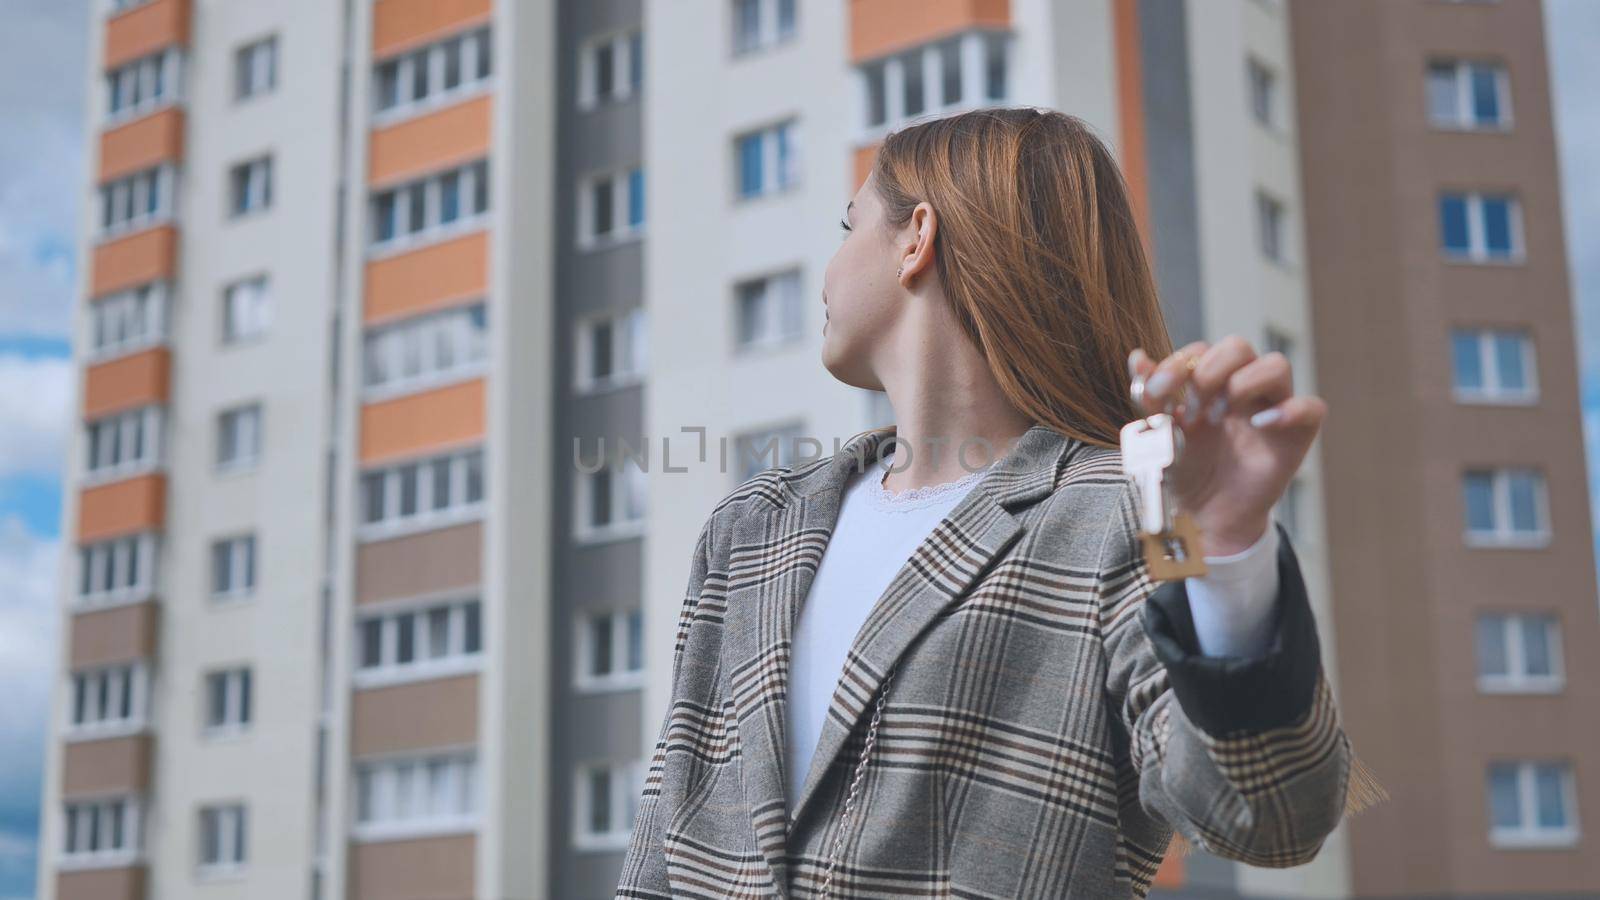 The girl shows the keys to the apartment against the backdrop of an apartment building